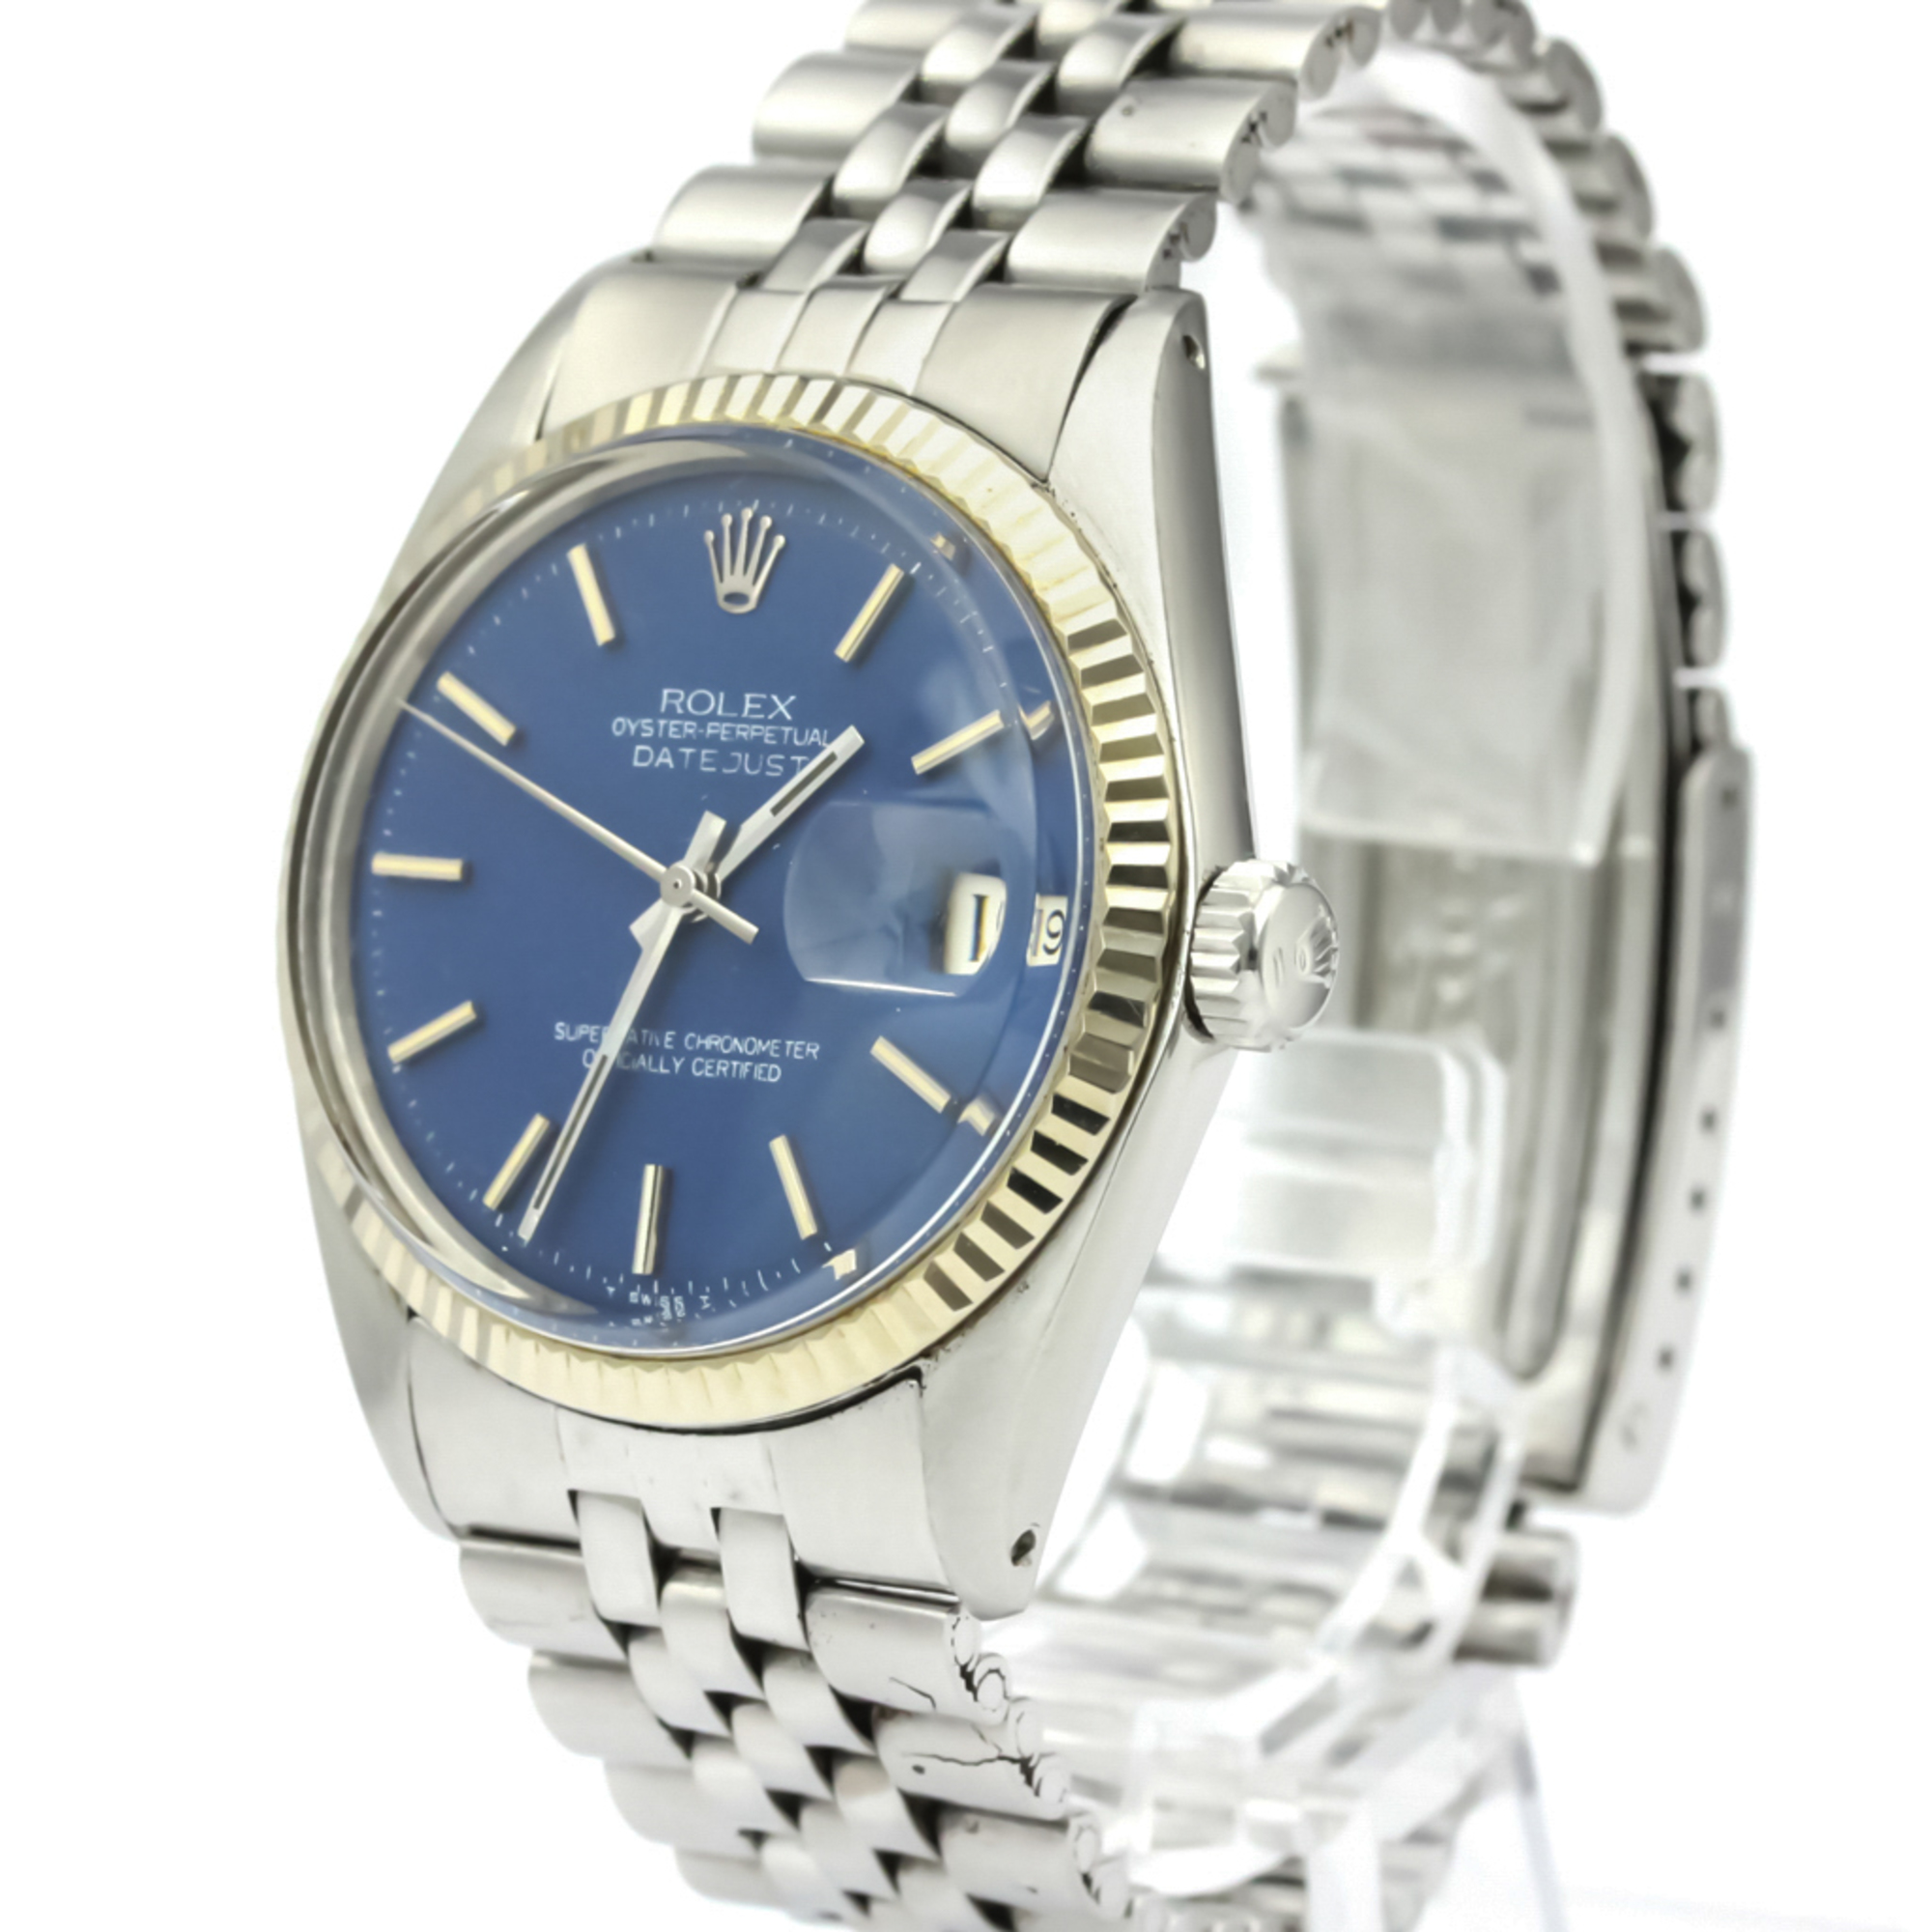 ROLEX Datejust 1601 White Gold Steel Automatic Mens Watch